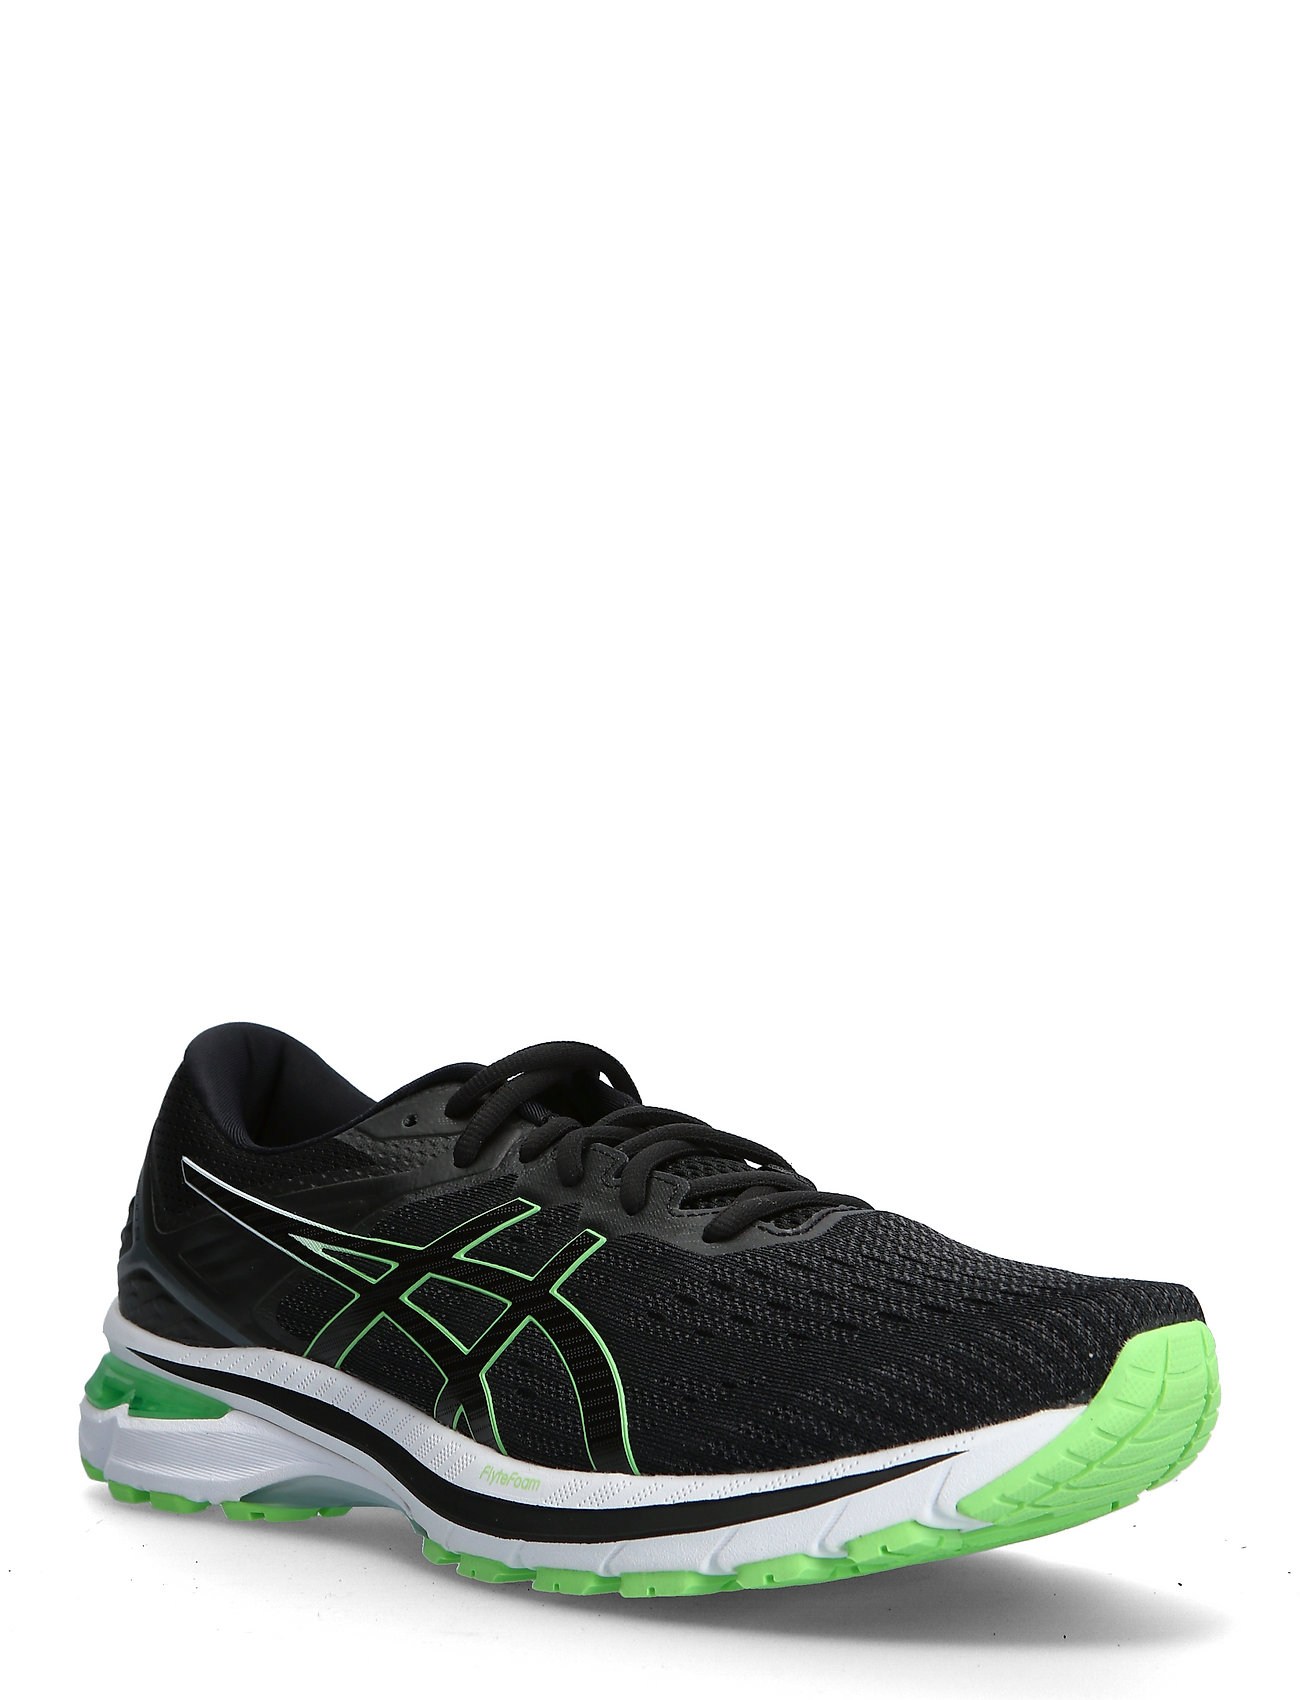 Gt-2000 9 Shoes Sport Shoes Running Shoes Musta Asics